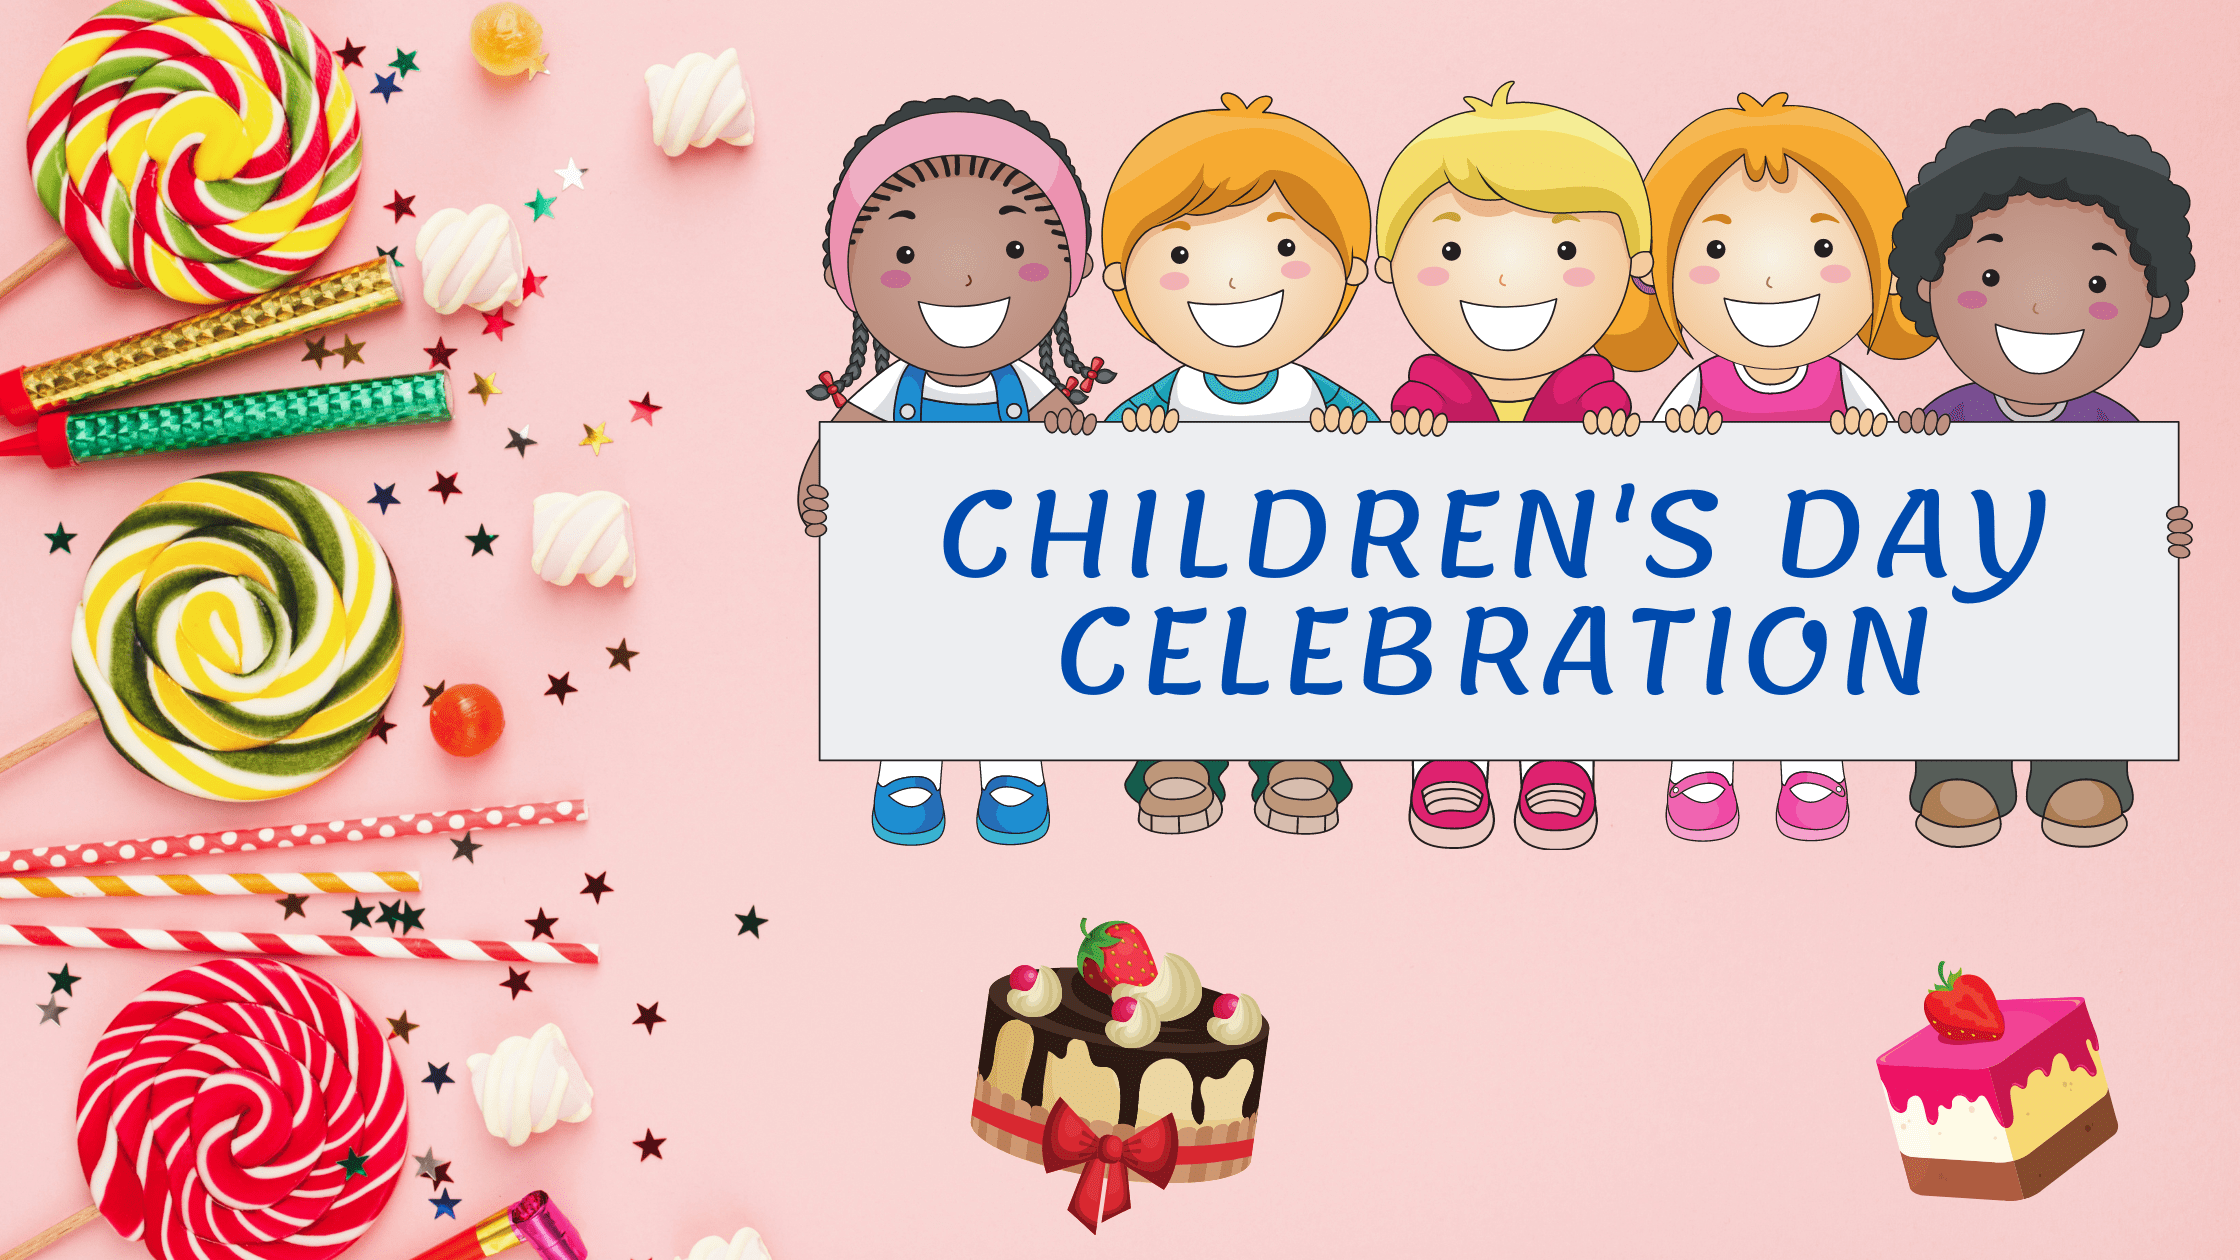 Celebrate Children’s Day With Delicious Cakes